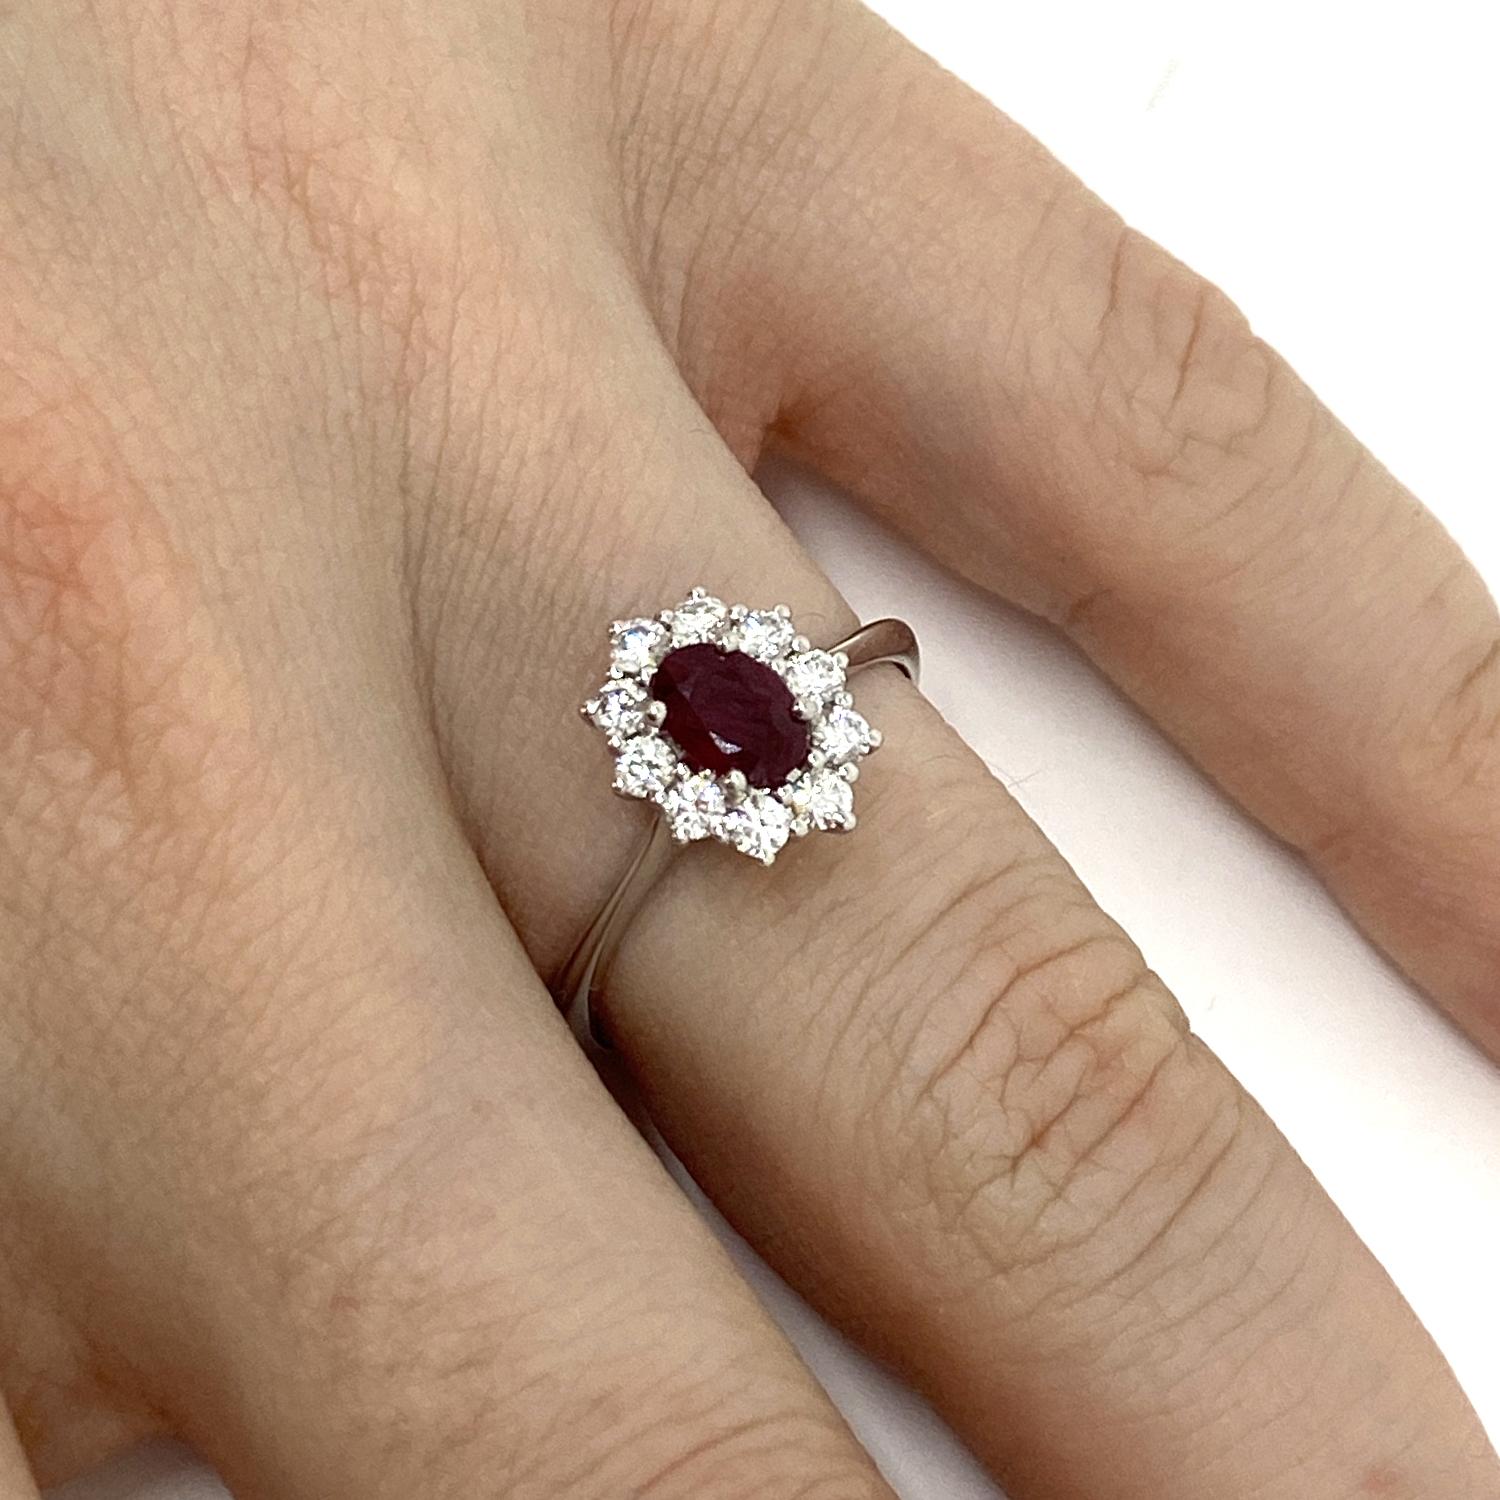 Ring made of 18kt white gold with natural oval-cut ruby for ct.0.41 and brilliant-cut white natural diamond surround for ct.0.32 color D/E SI
-------------------------------------------------

Important Note : In order to speed up the publishing